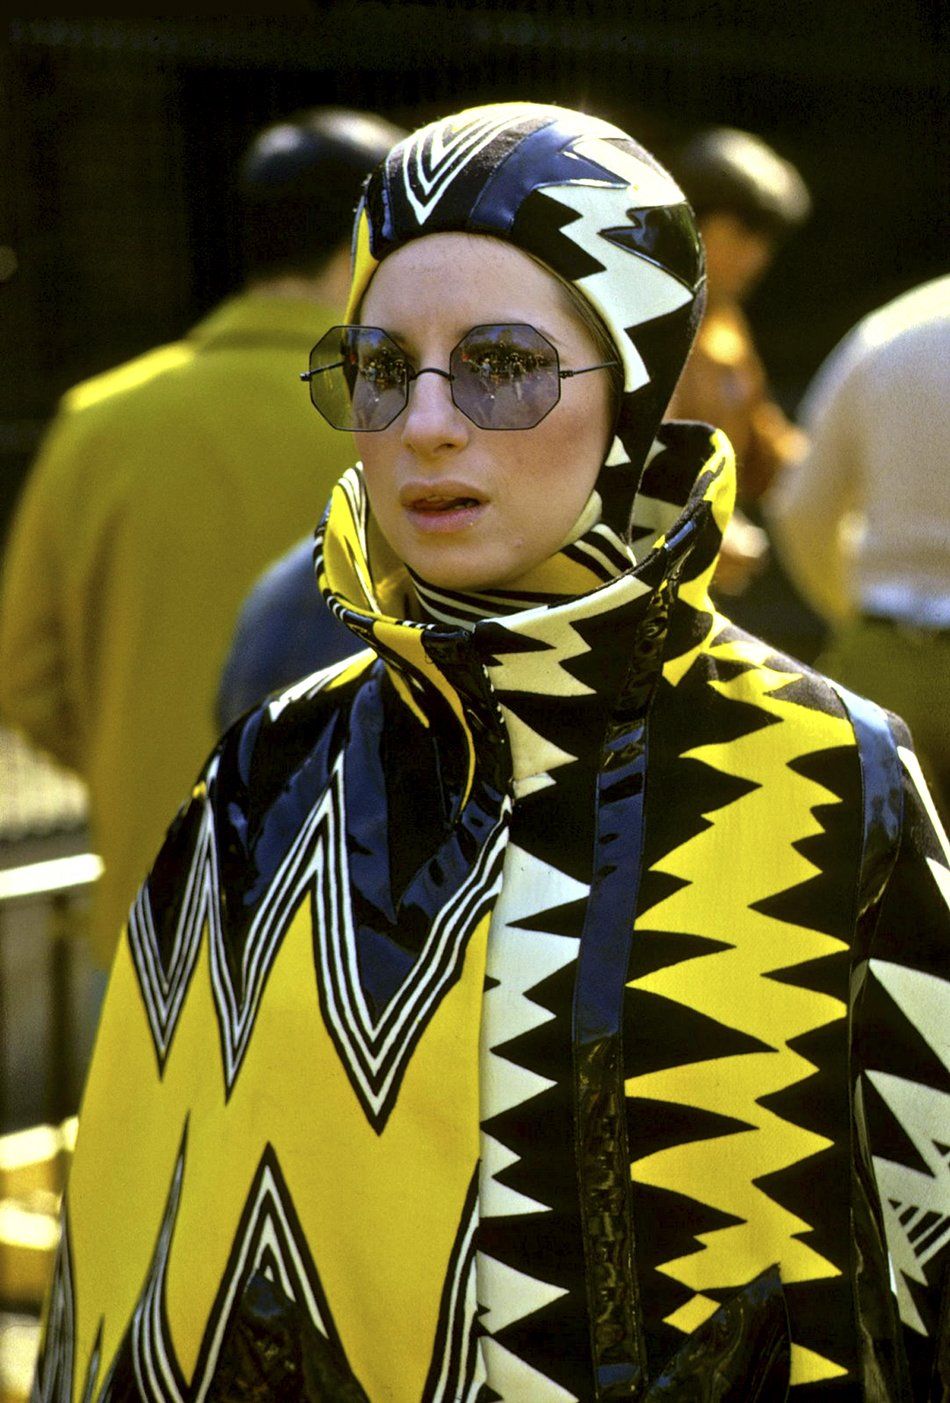 Streisand dressed in her crazy  yellow zebra outfit.